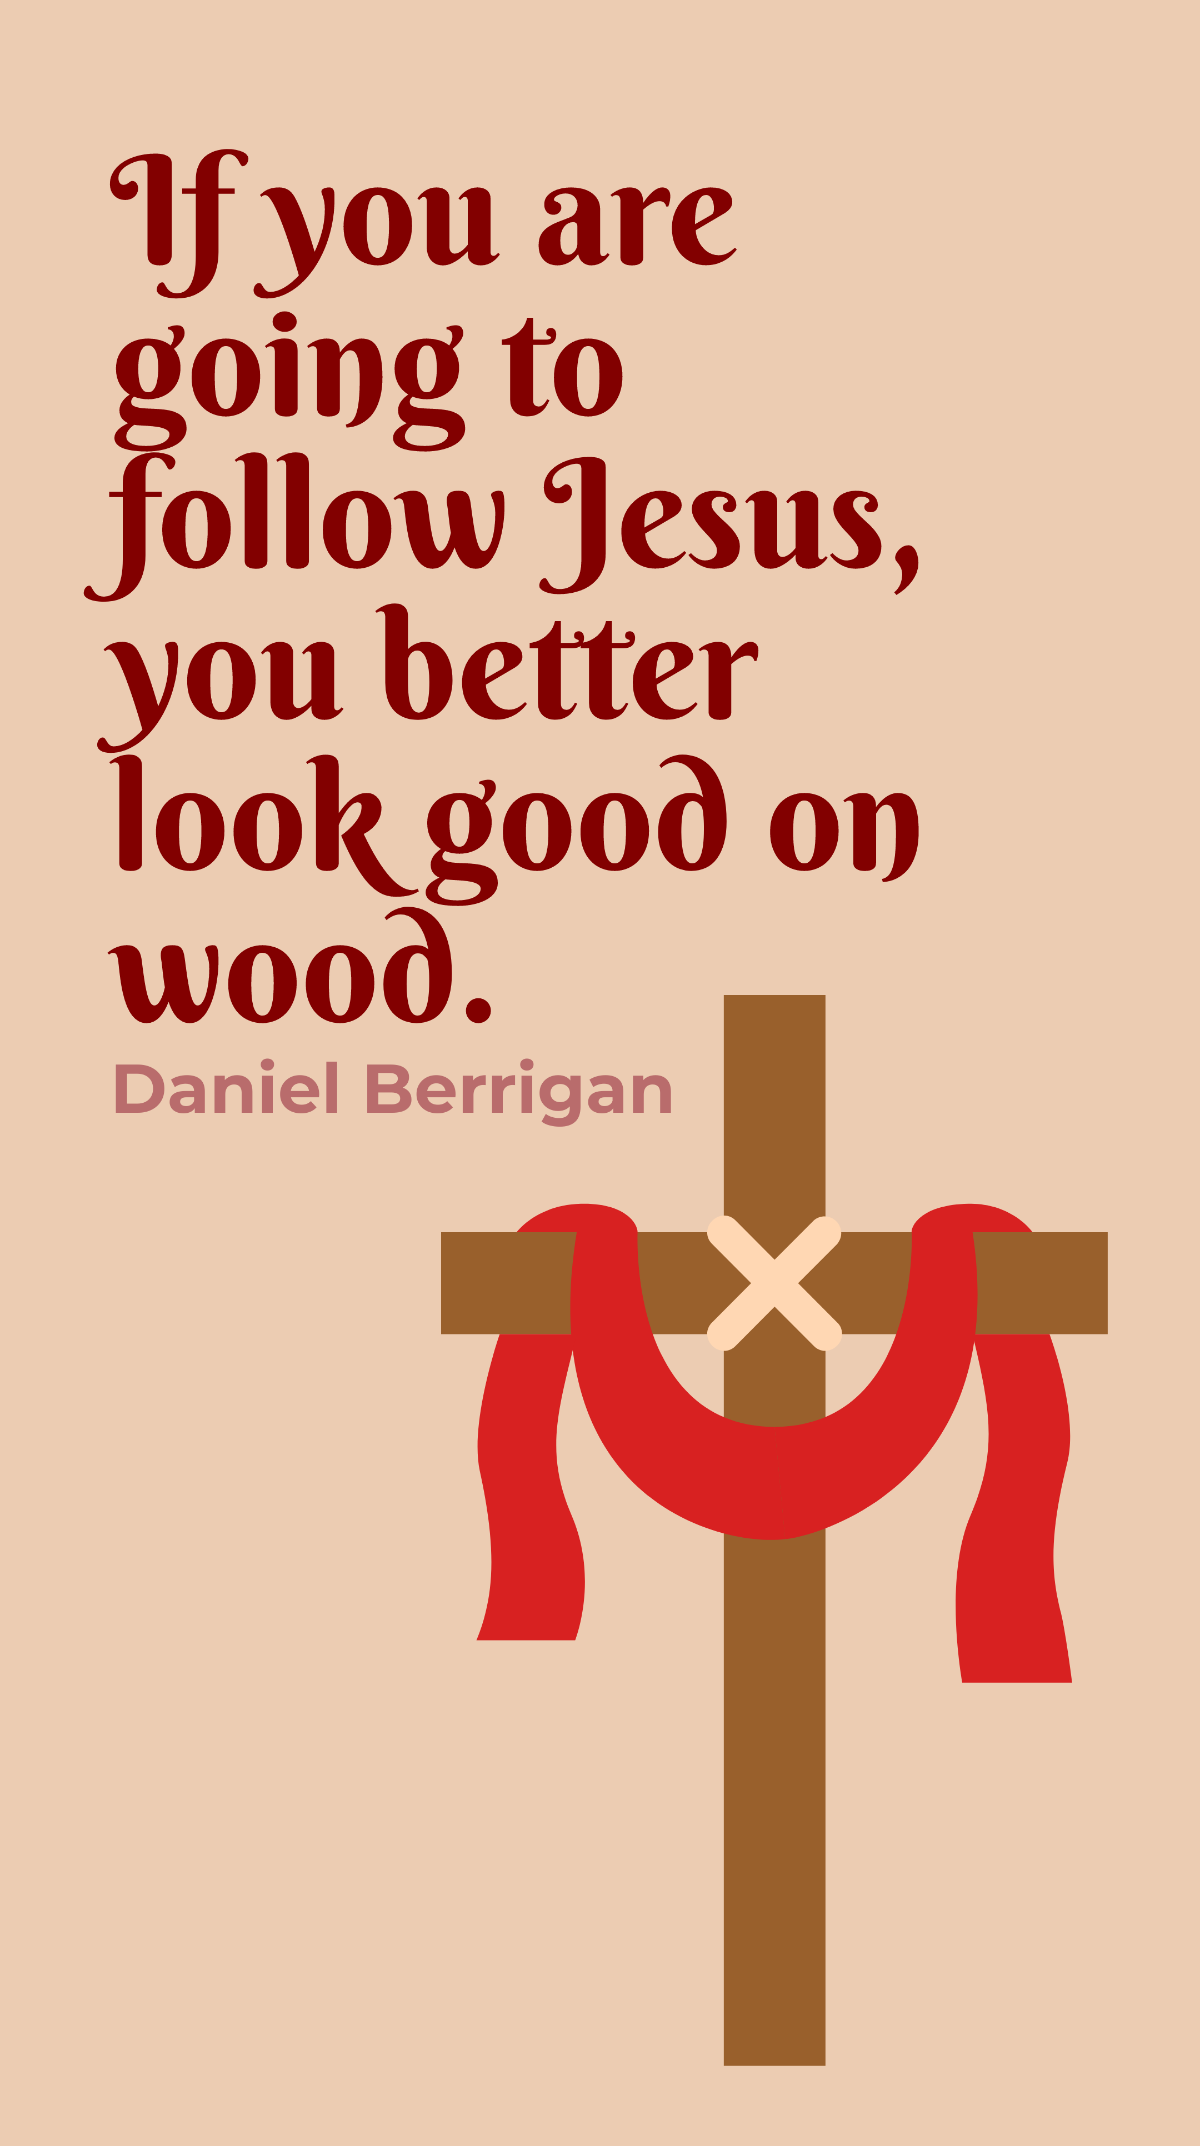 Daniel Berrigan - If you are going to follow Jesus, you better look good on wood. Template